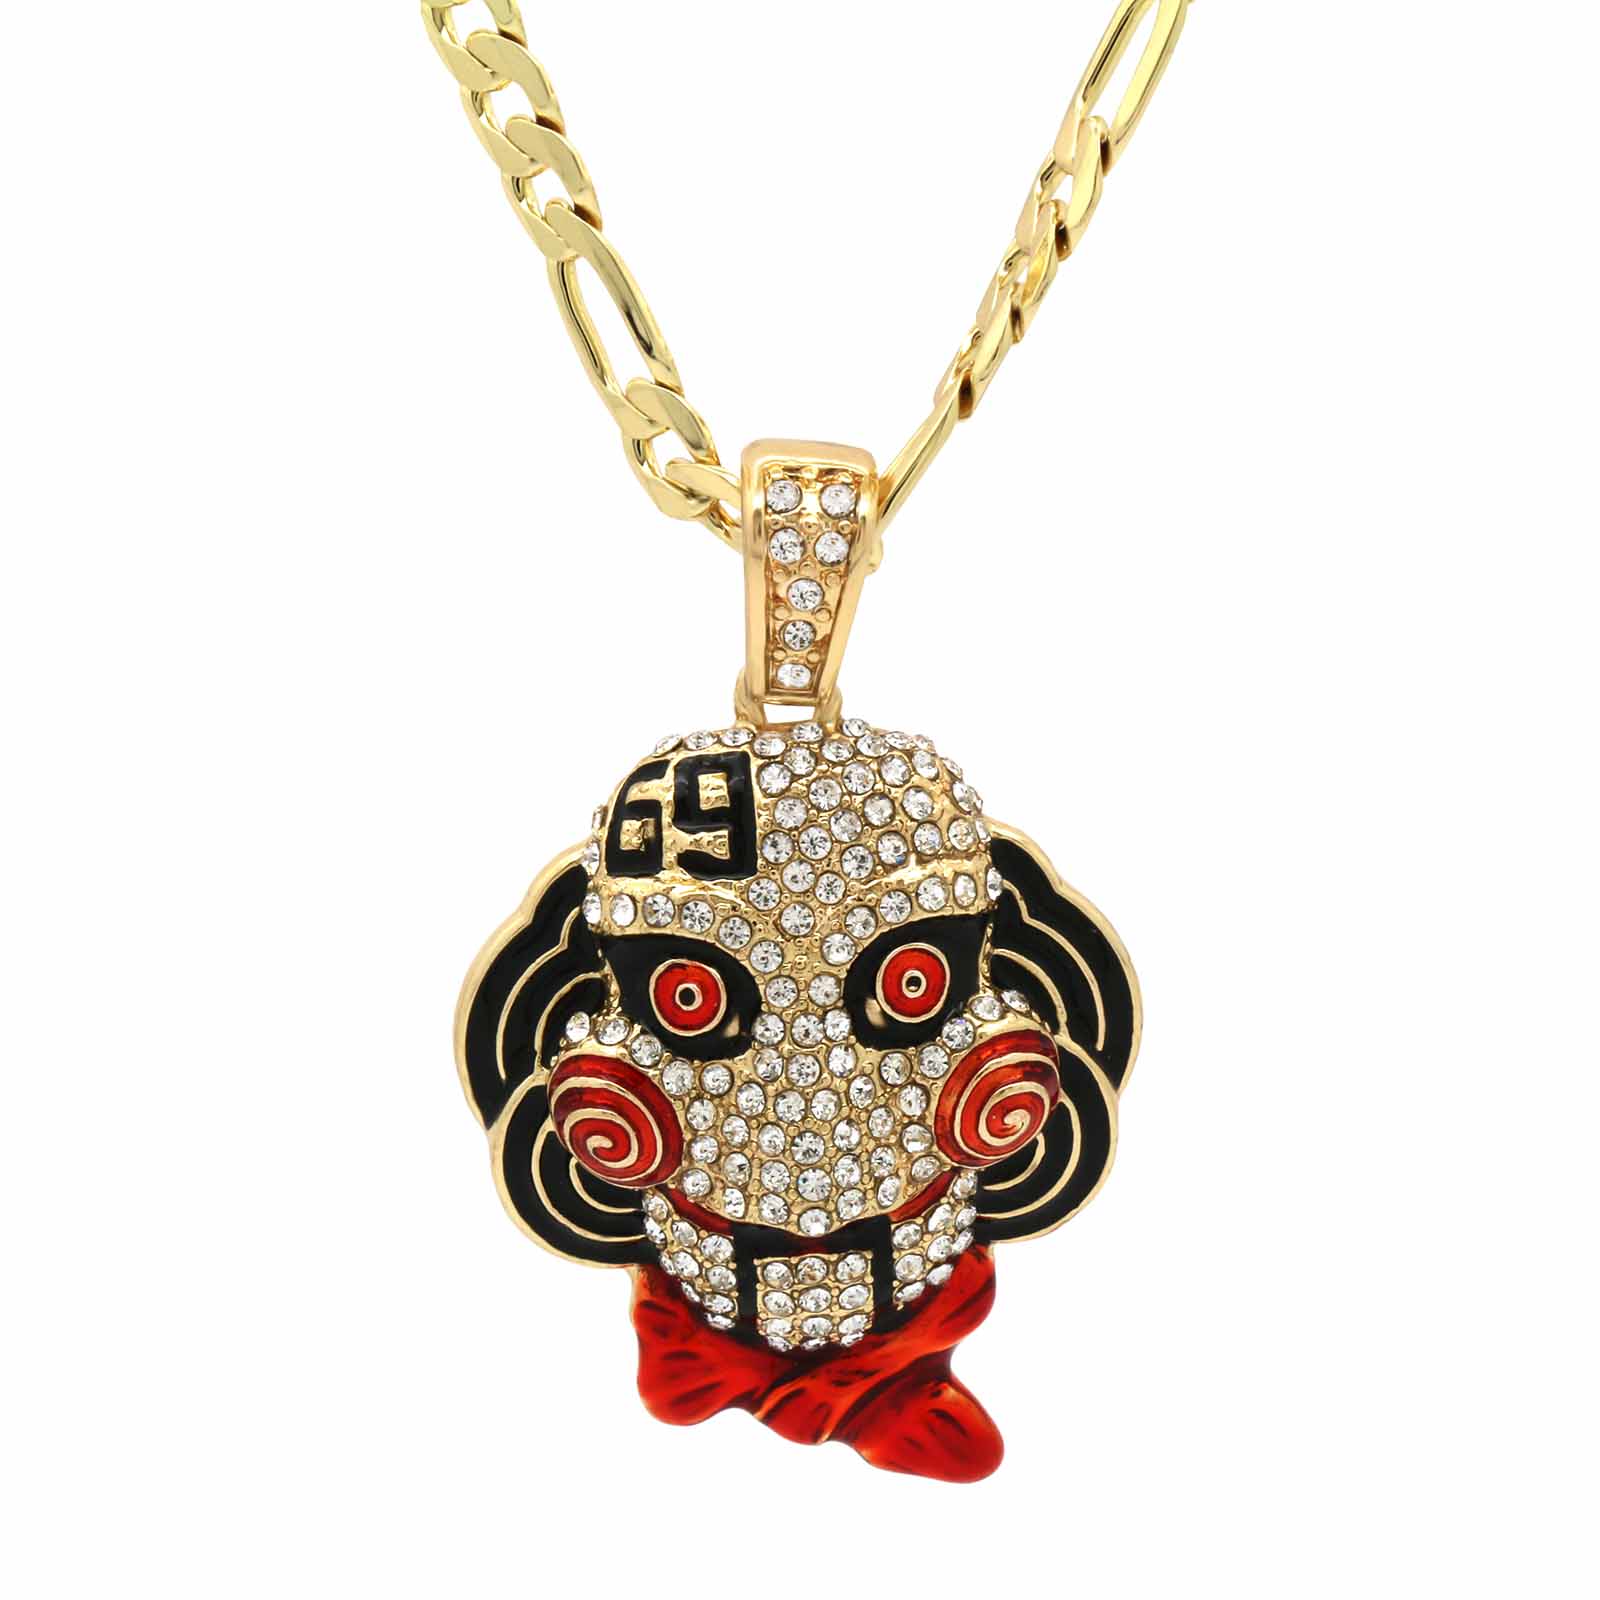 The Saw 69 Necklace